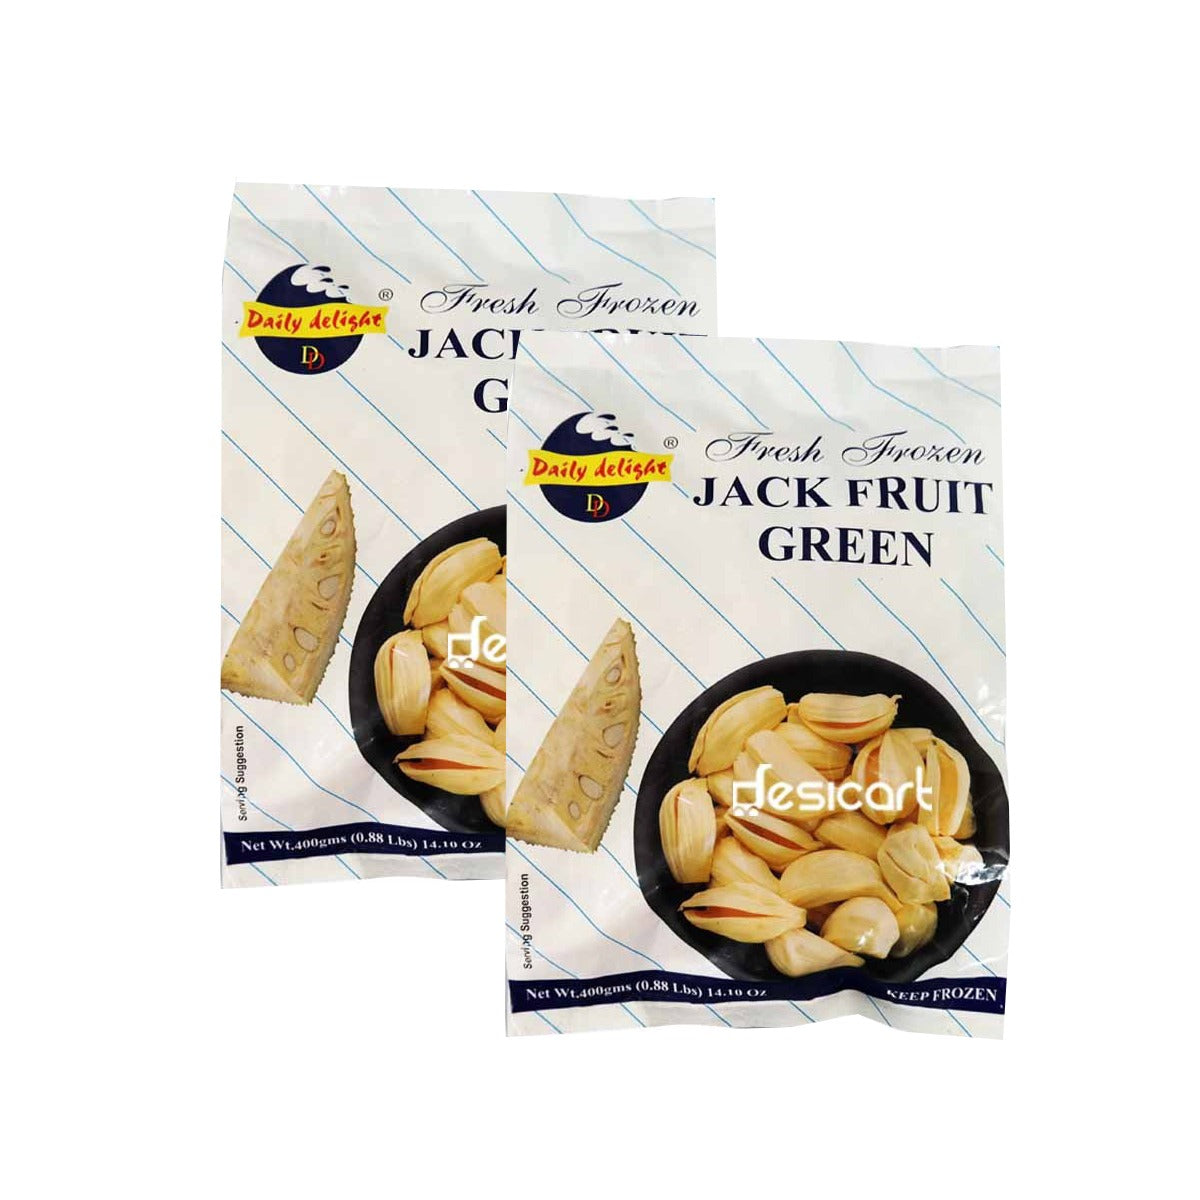 DAILY DELIGHT JACKFRUIT GREEN 400g(PACK OF 2)